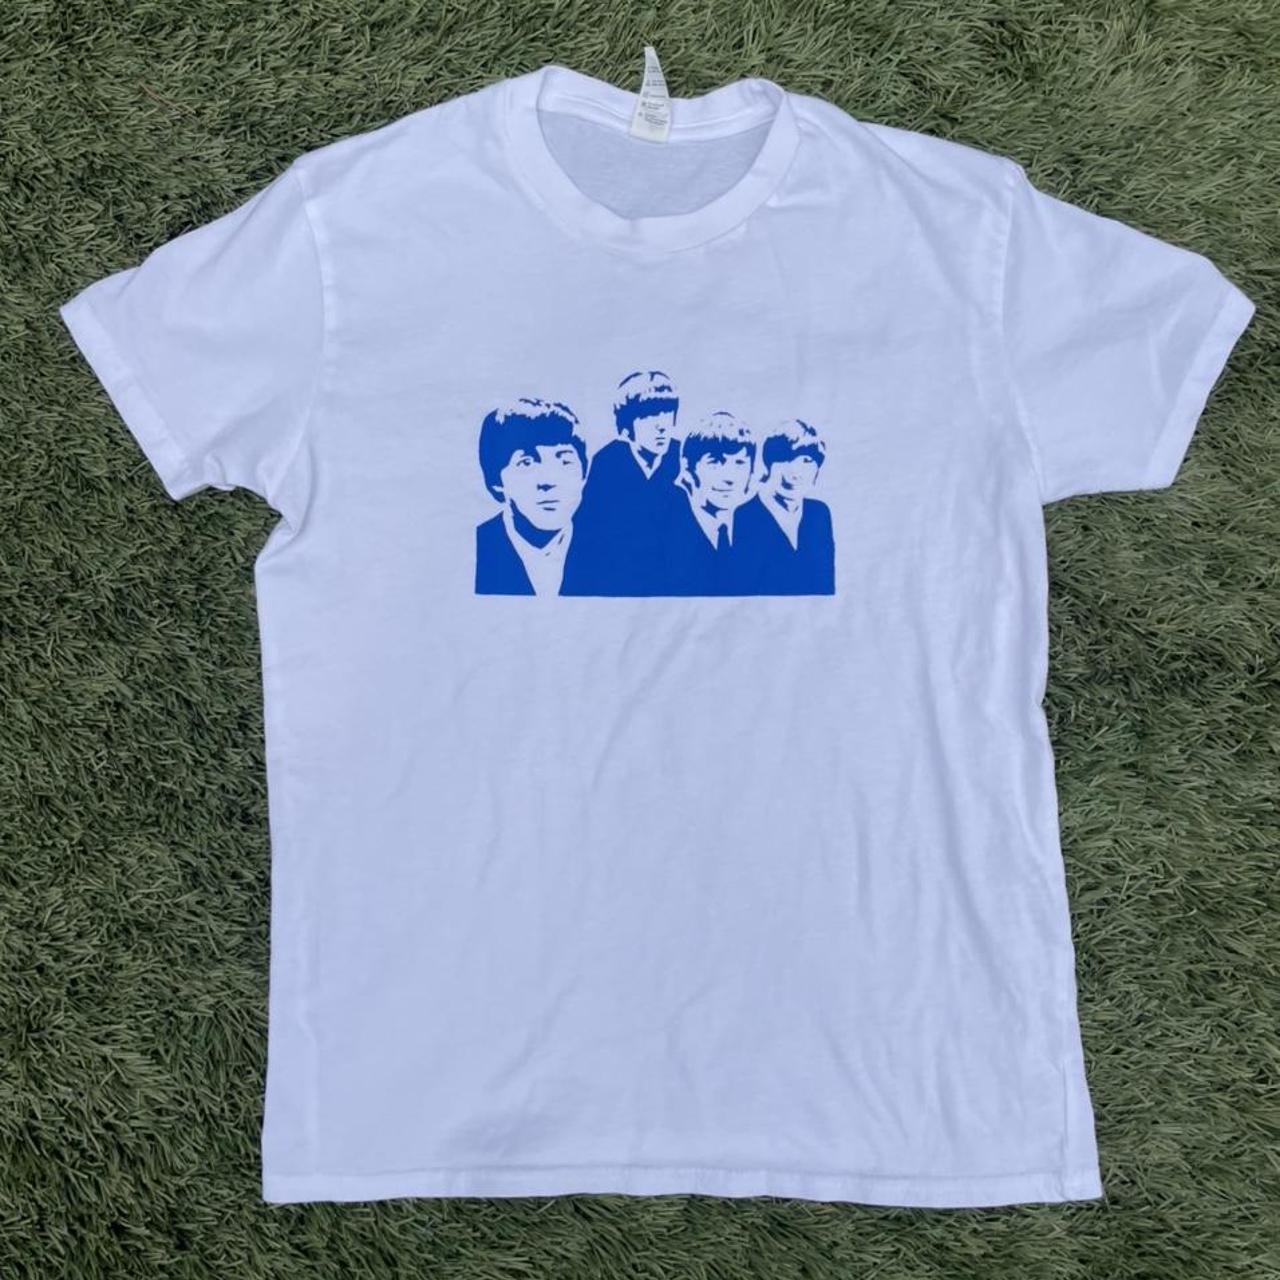 Product Image 1 - Beatles Screen Printed Tee🎼
Size- youth